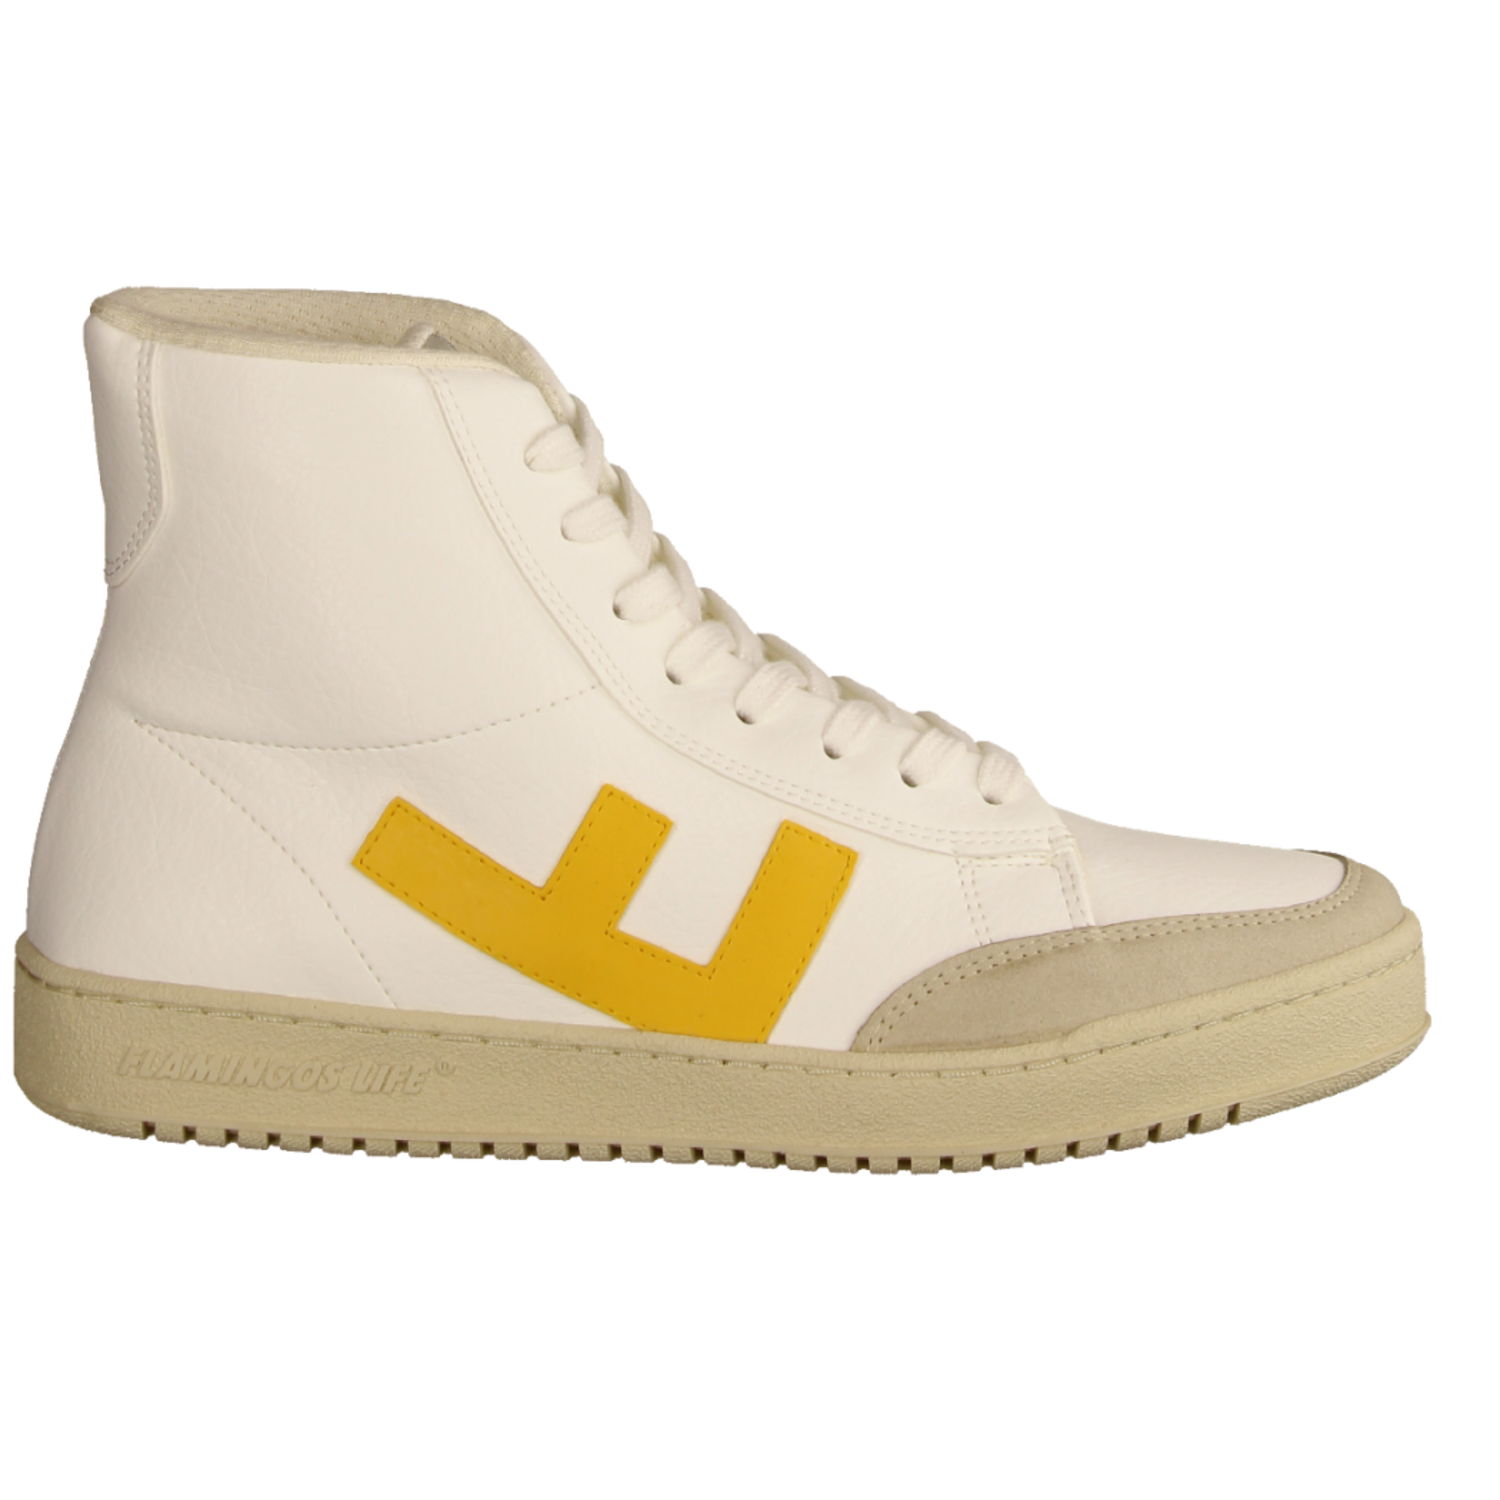 Flamingo's Life Old 80s Damen Boots in White Yellow White Yellow (weiß)